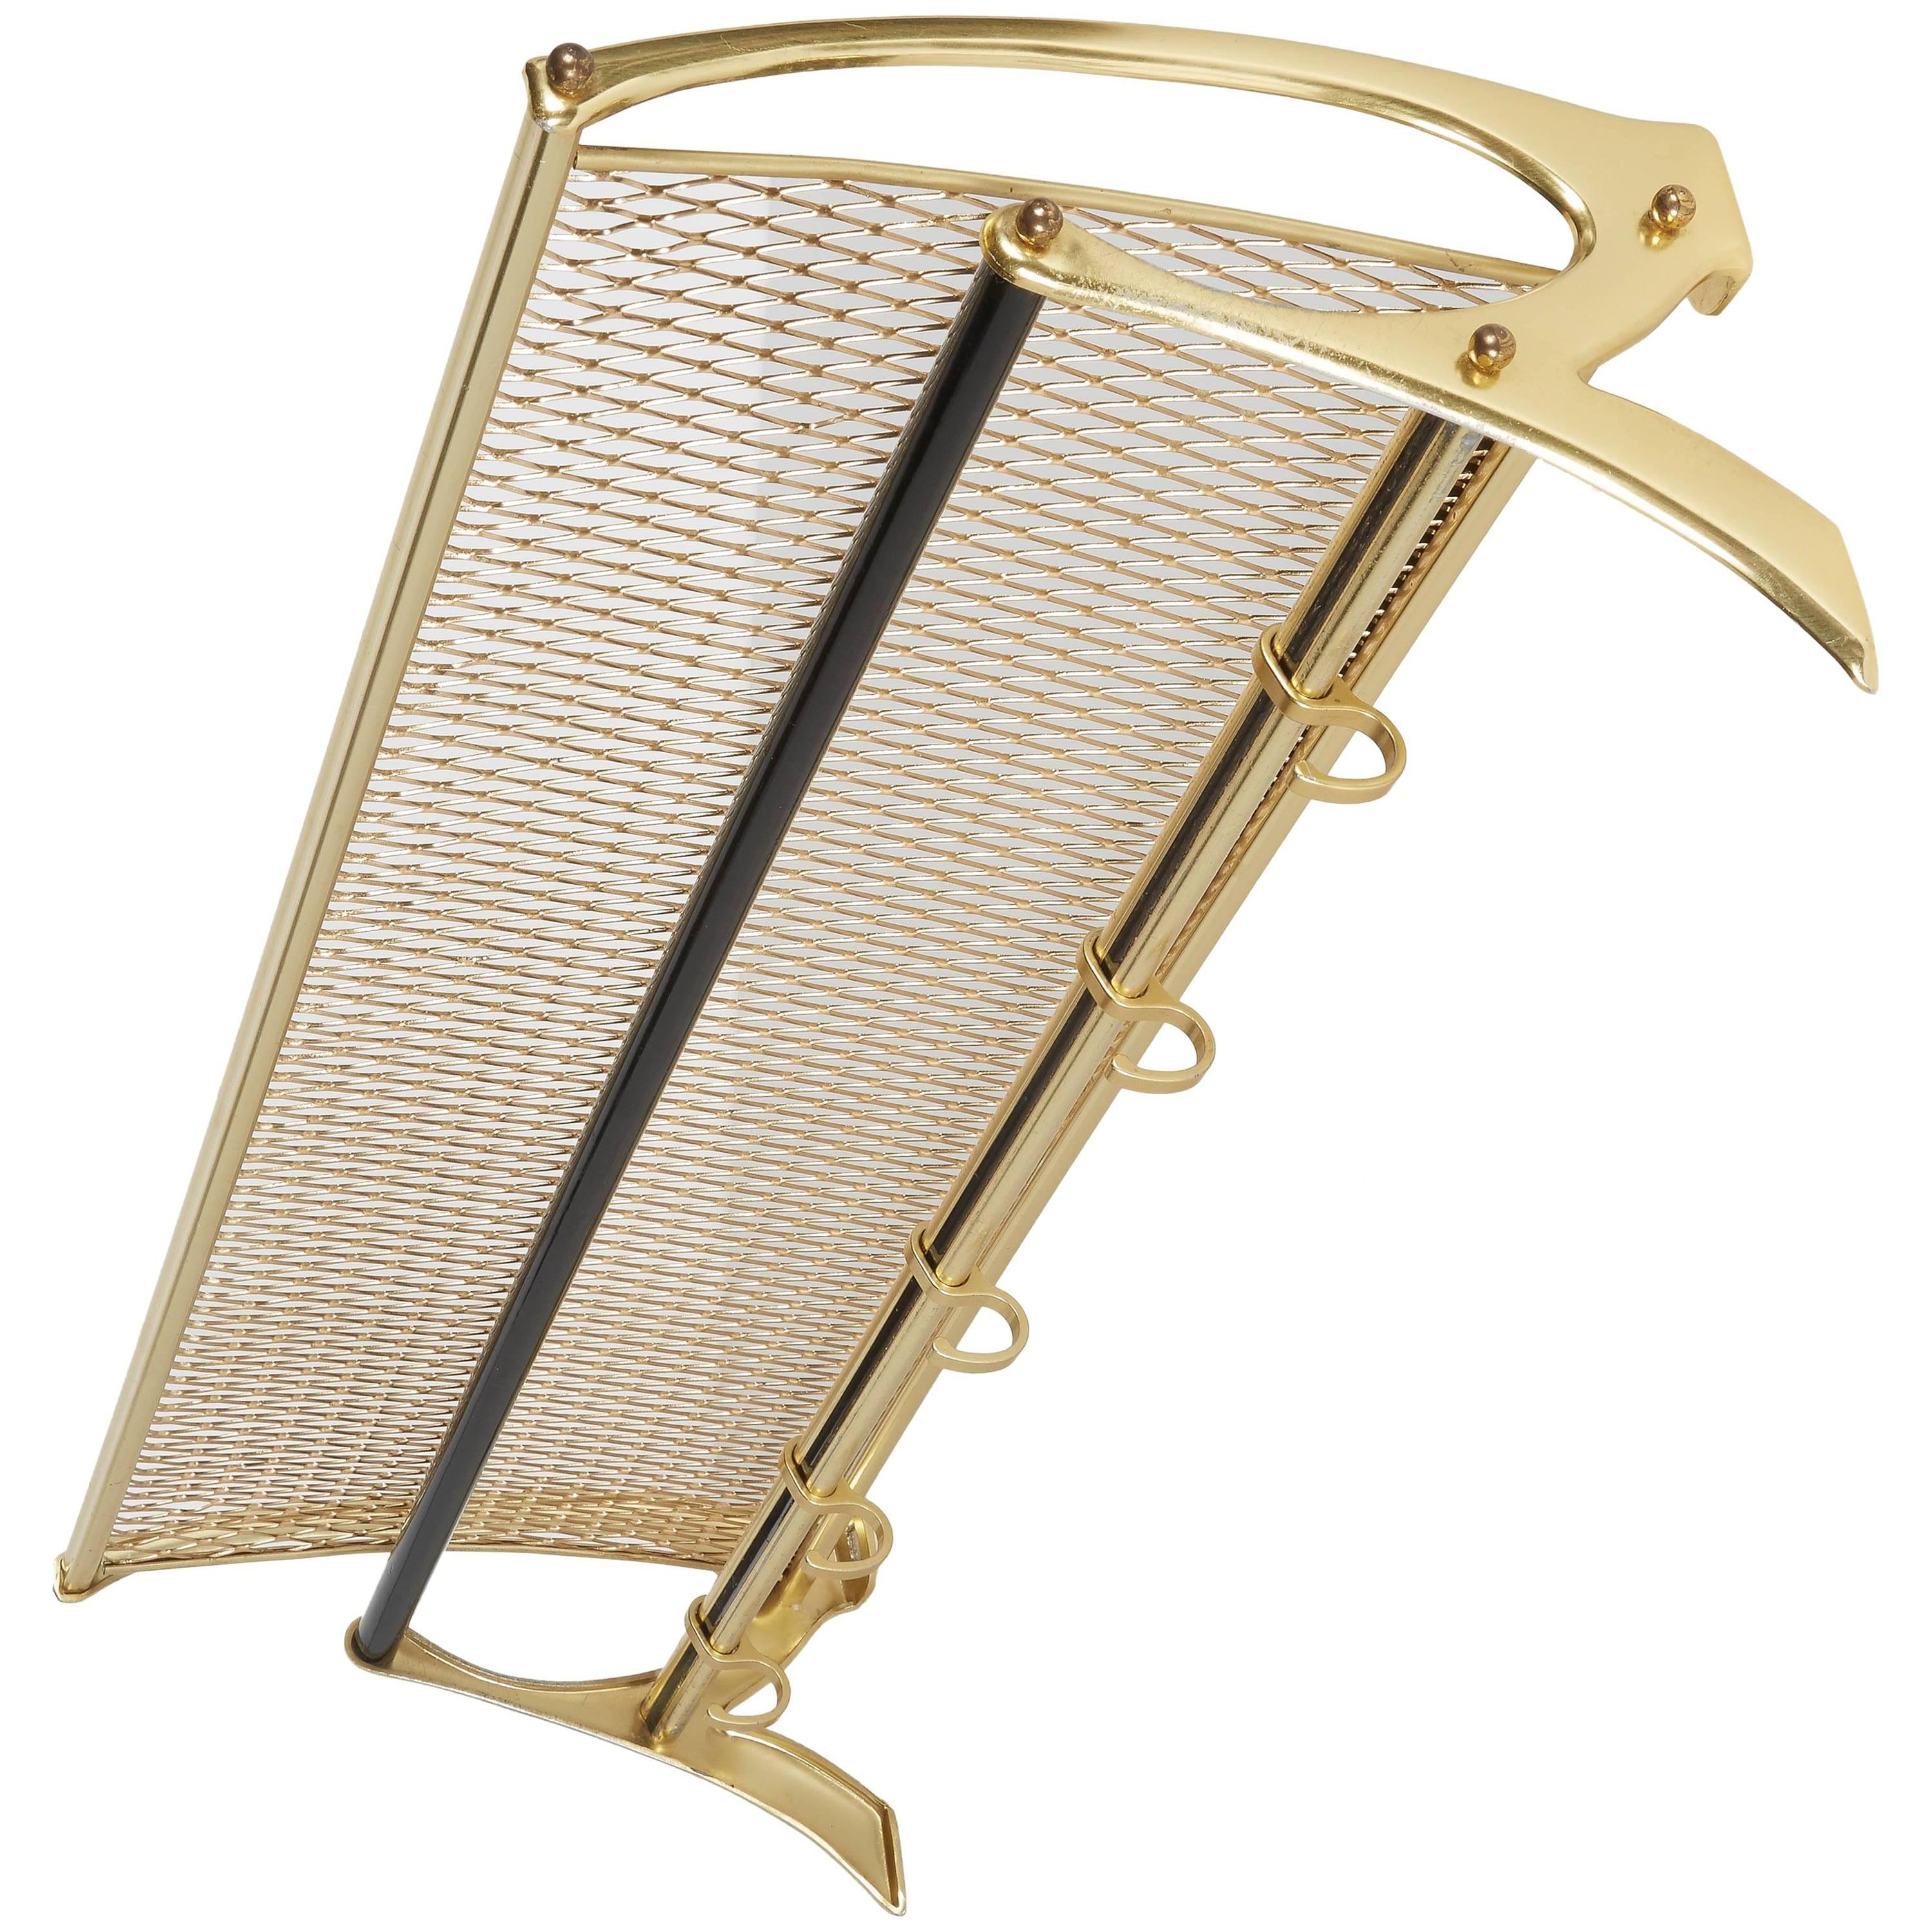 Austrian Mid-Century modern coat and hat rack with wall mount design.
Brass-plated metal with modernist design includes gold metal grid top shelf and cross bars with black enameled details. Fitted with five sliding coat or jacket hooks. Great